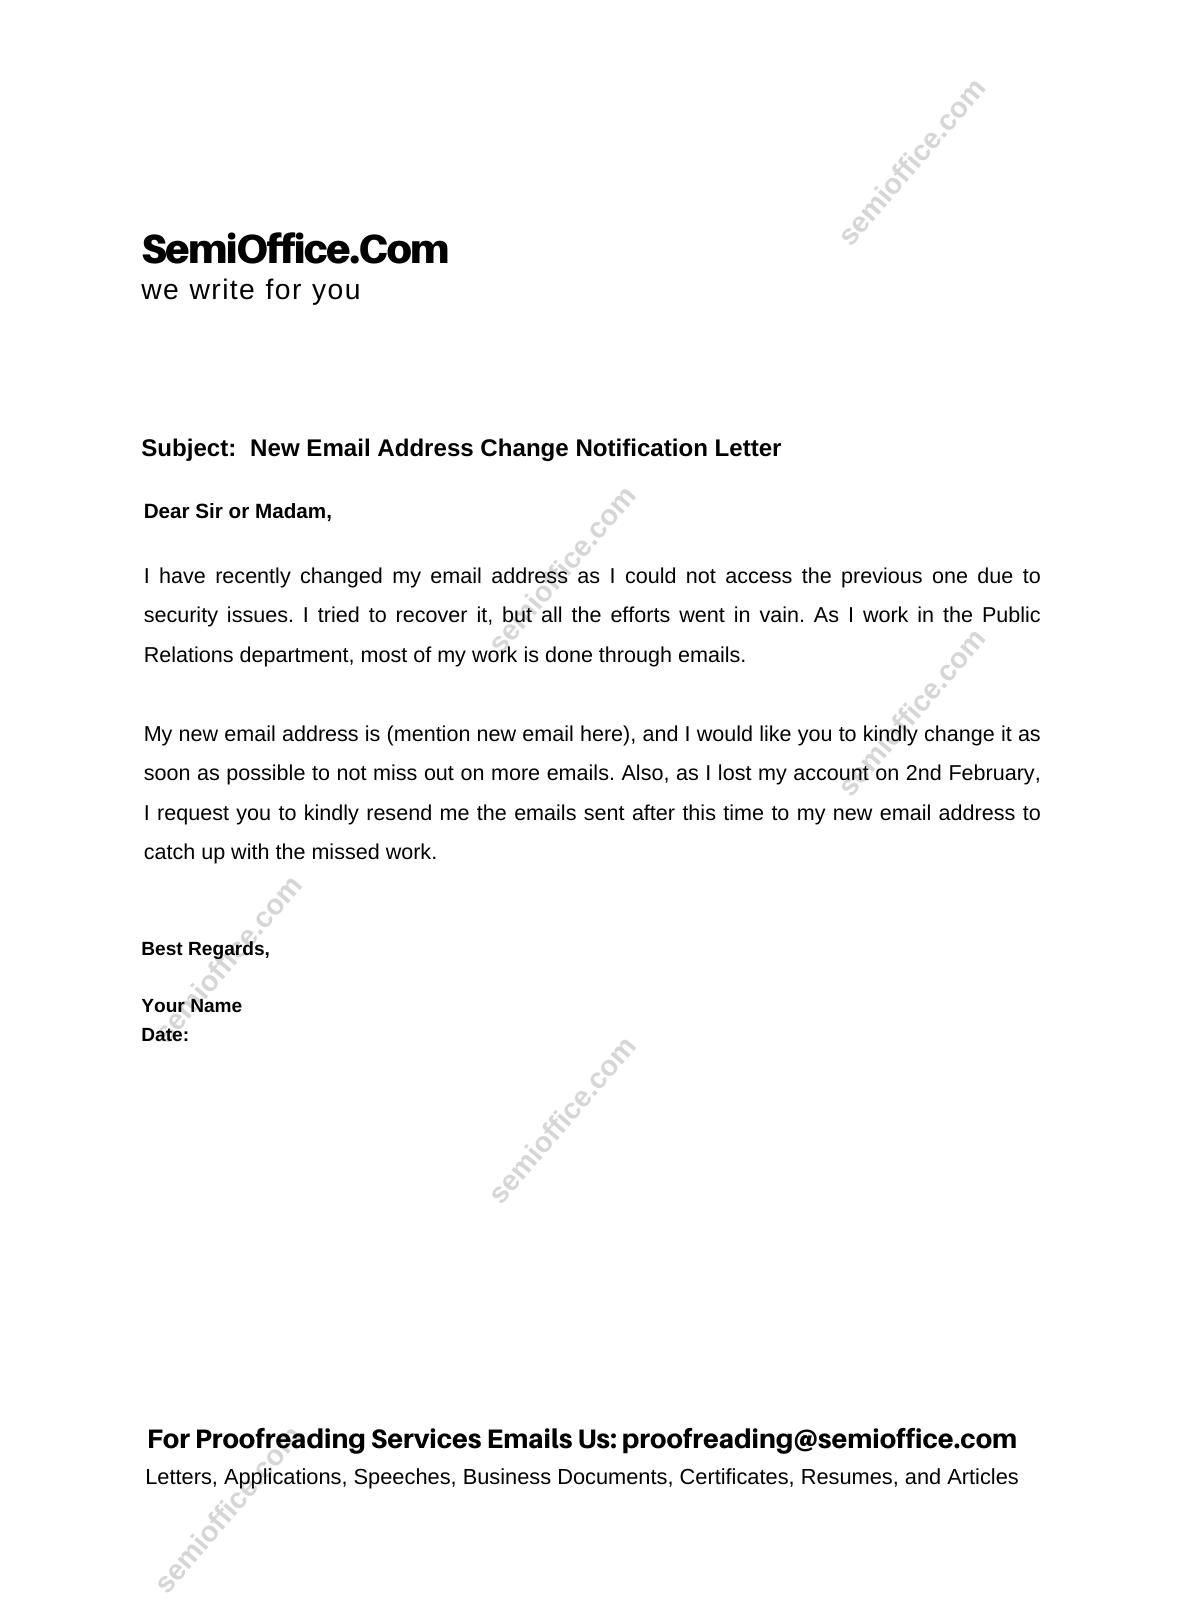 new-email-address-change-notification-letter-semioffice-com